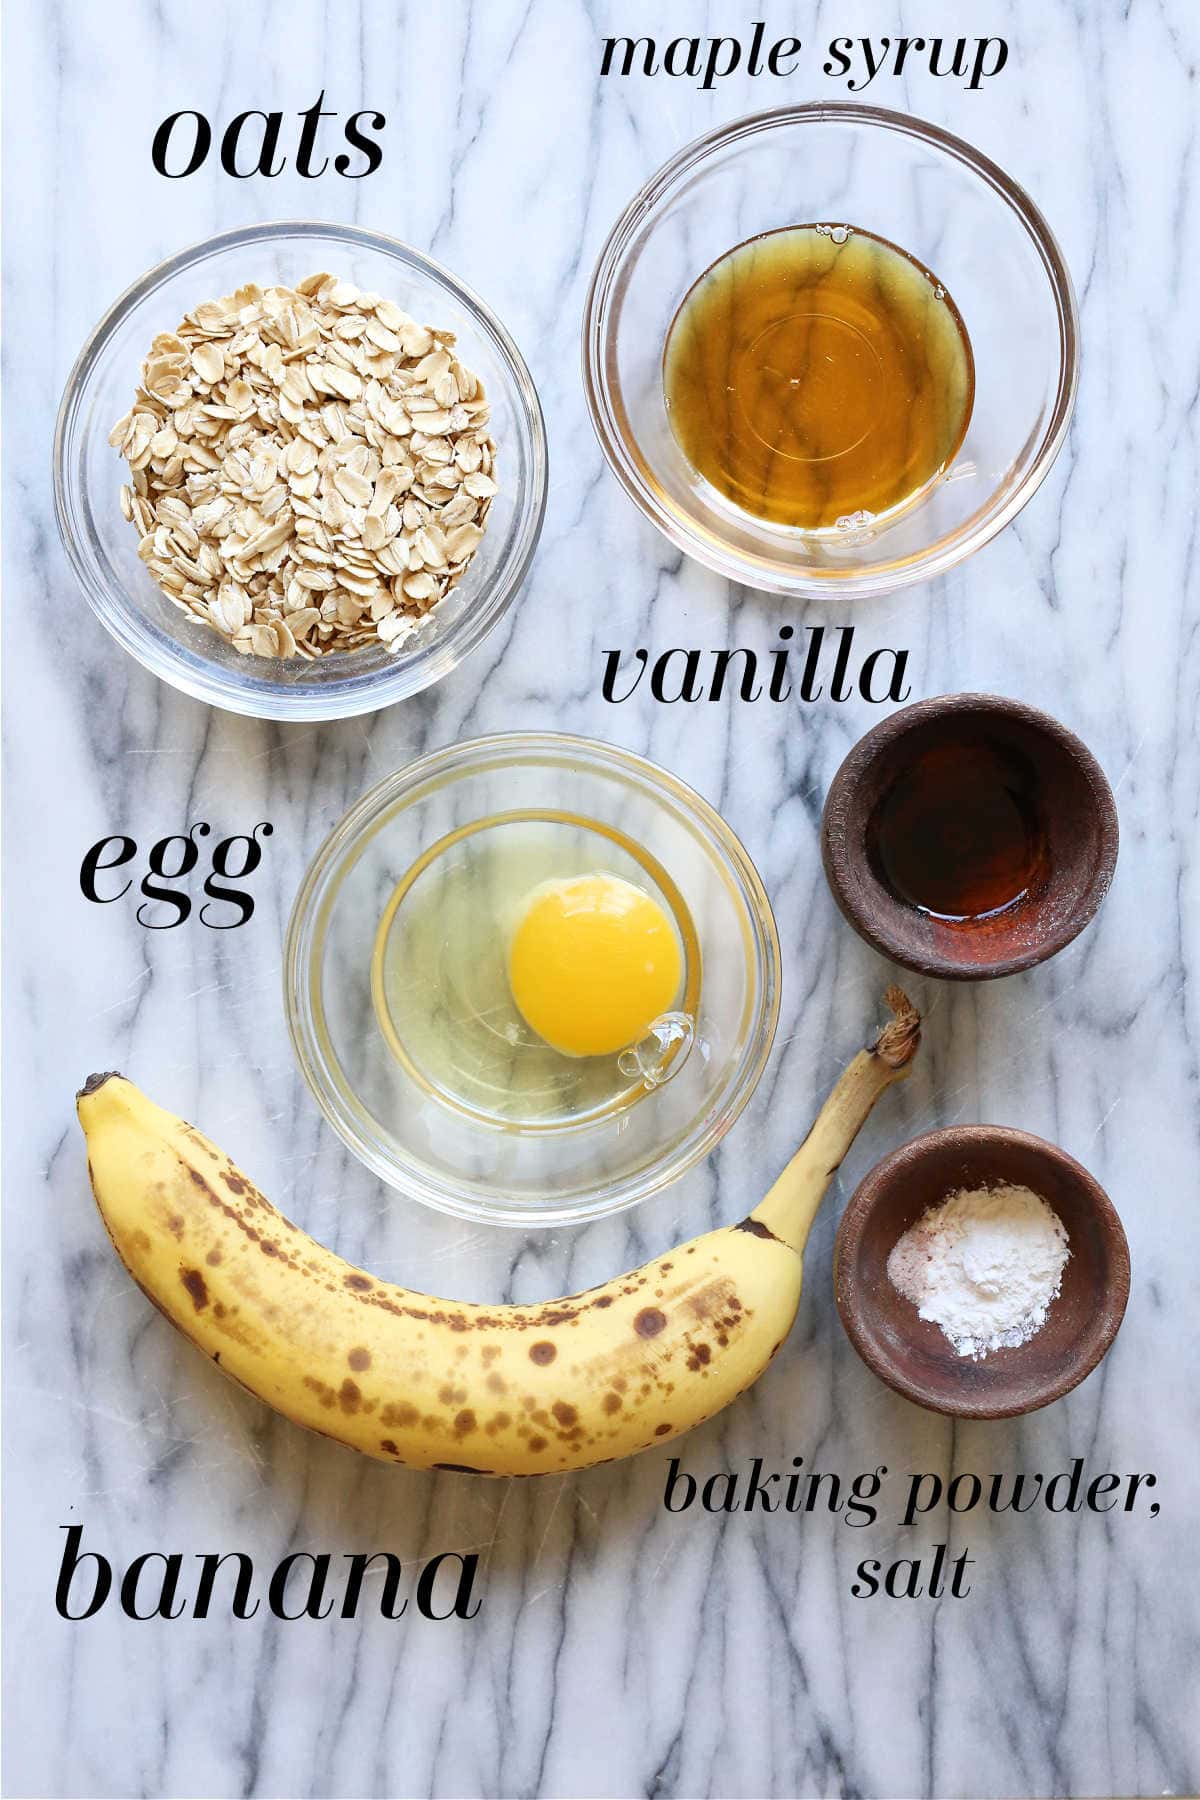 baked oats ingredients of old fashioned rolled oats, banana, egg, maple syrup, vanilla, baking powder, salt